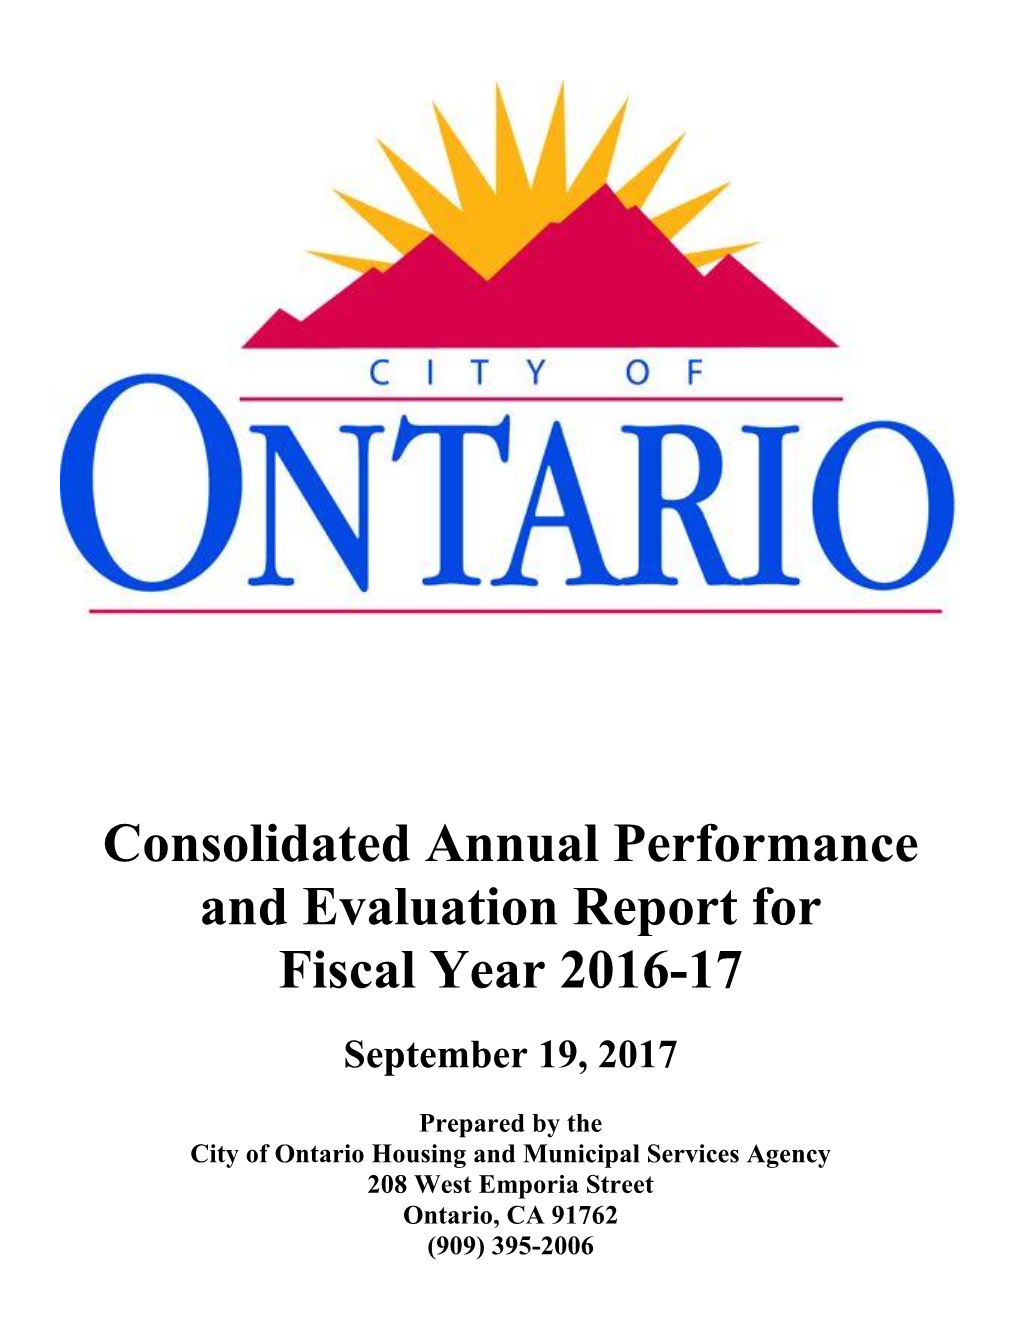 Consolidated Annual Performance and Evaluation Report for Fiscal Year 2016-17